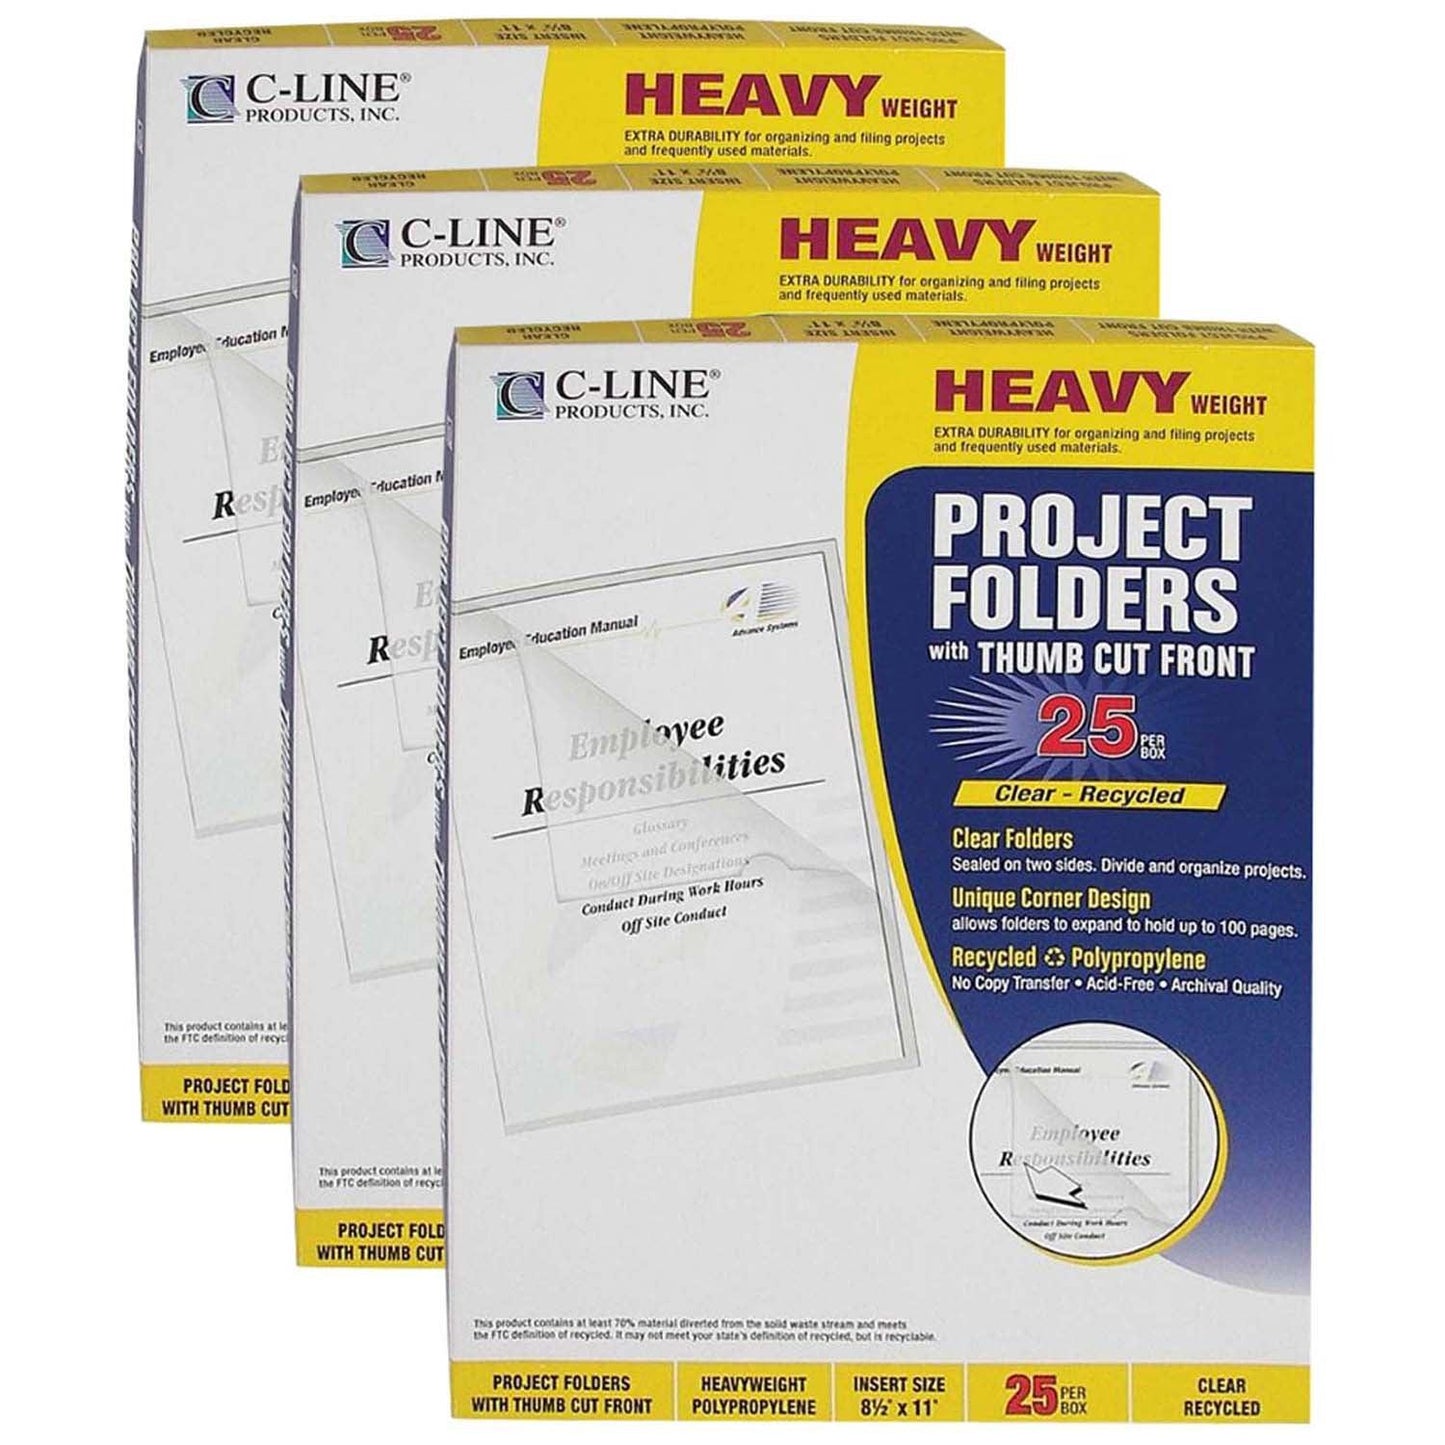 Recycled Poly Project Folders, Clear, Reduced Glare, 11" x 8-1/2", 25 Per Box, 3 Boxes - Loomini